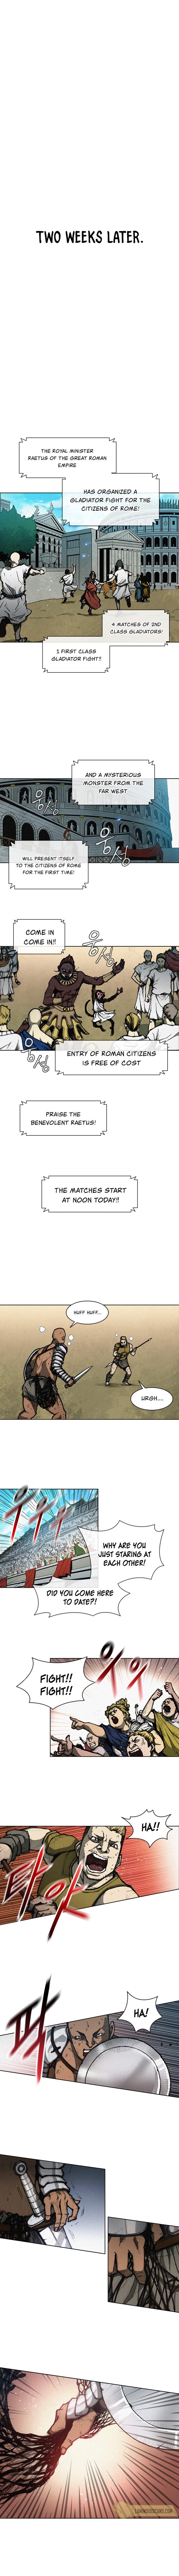 long-way-of-the-warrior-chap-4-7